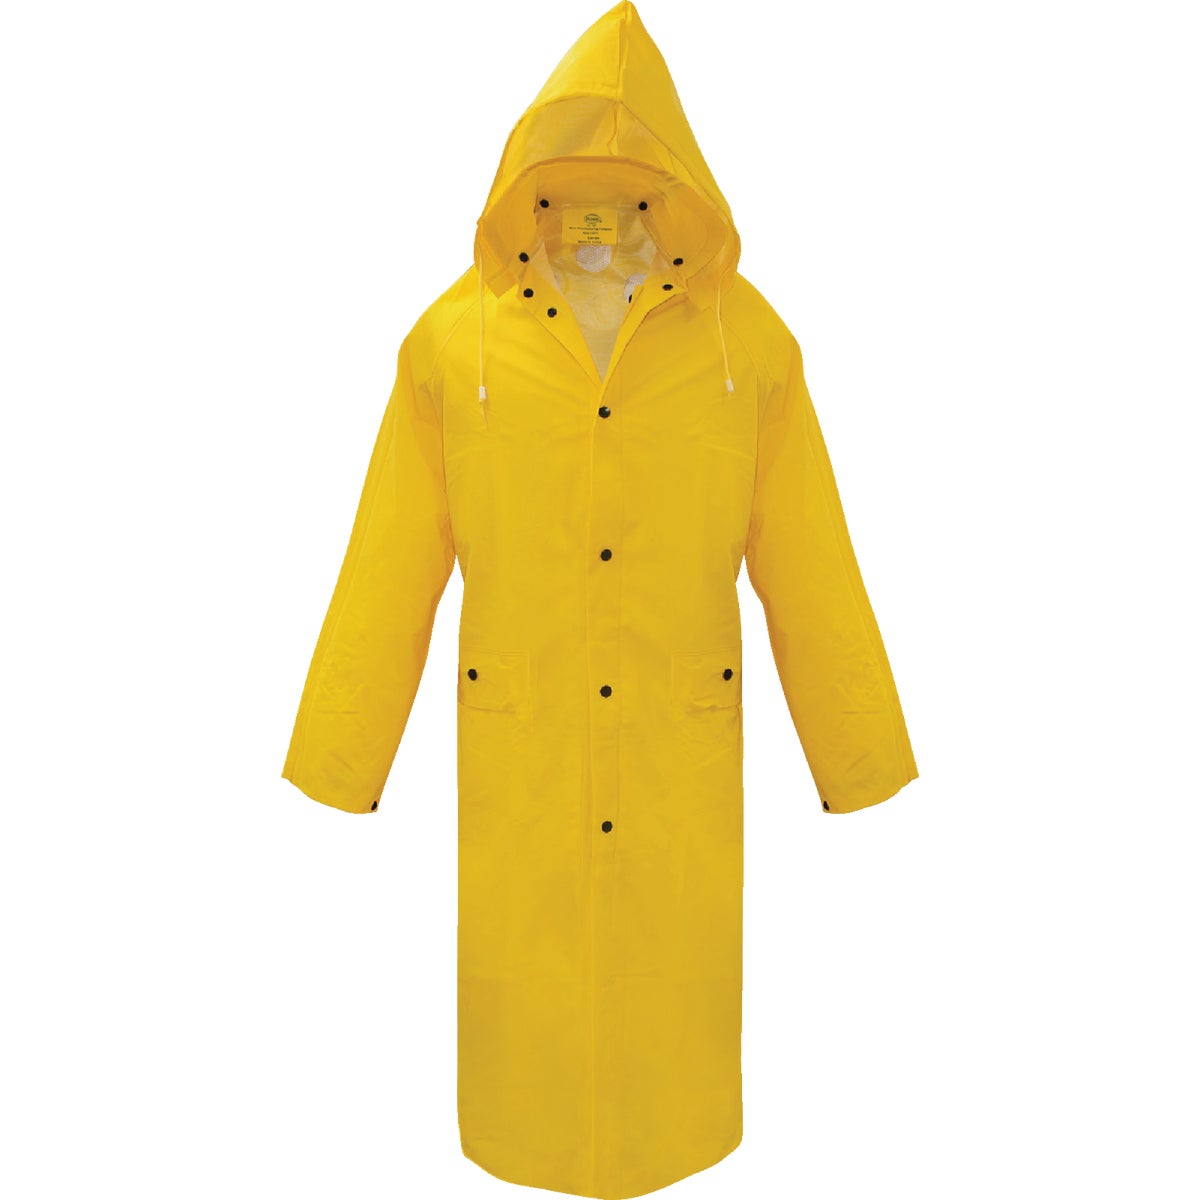 Item 703589, Safety yellow full length 48-inch lined rain coat.